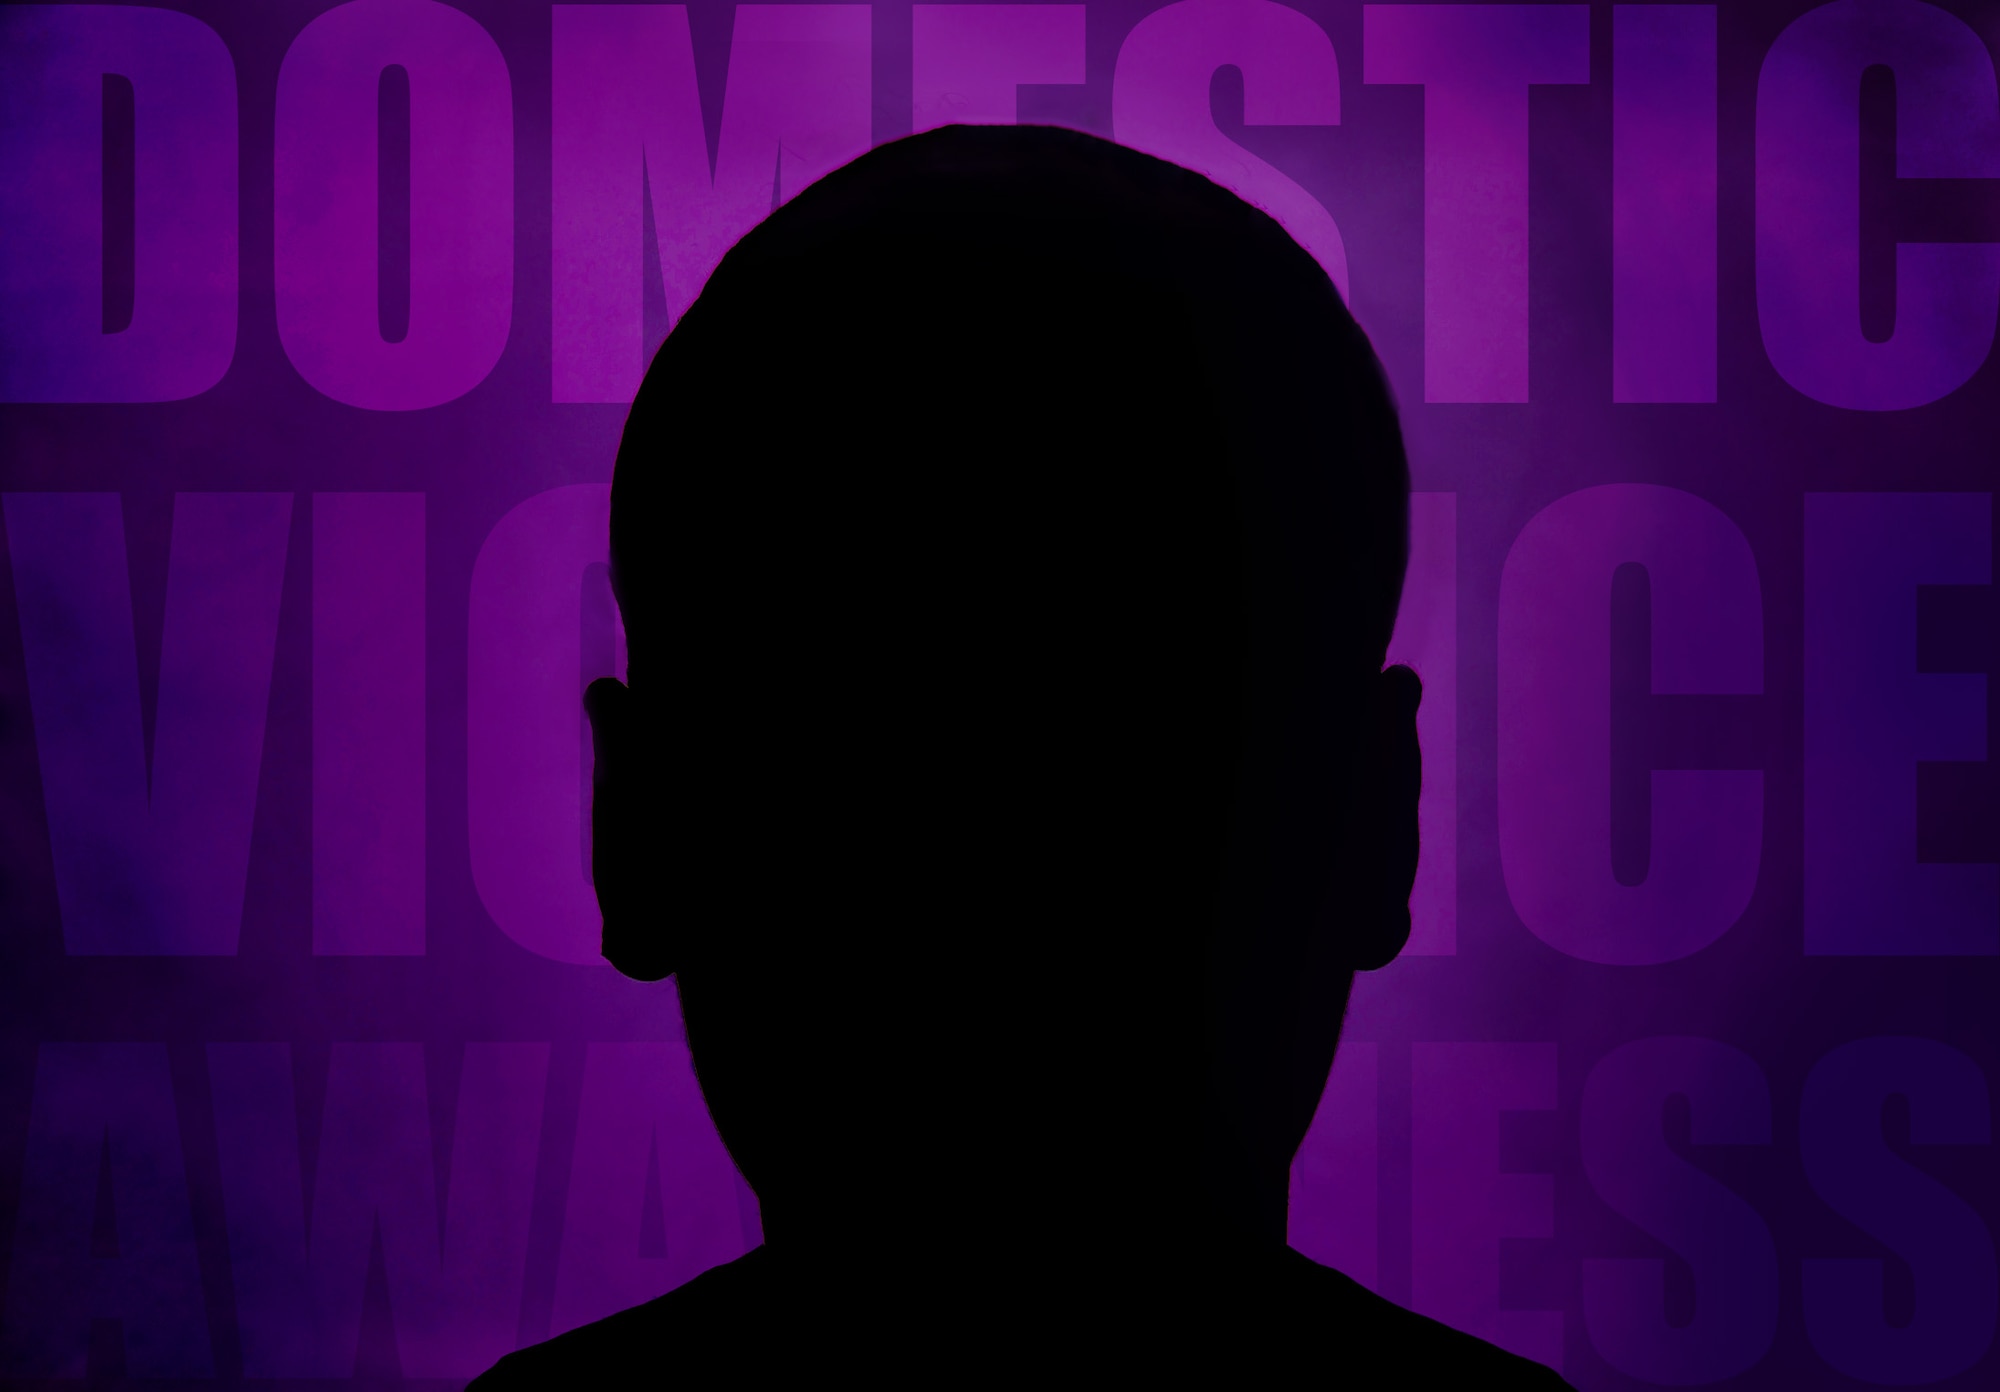 A U.S. Service member assigned to Joint Base Langley-Eustis, Va., remains anonymous while telling her story of being a victim of domestic violence, at Langley Air Force Base, Va., Oct. 20, 2015. The Service member came forward with her story during Domestic Violence Awareness Month in hopes of encouraging others affected by domestic violence to seek help. (U.S. Air Force photo illustration by Senior Airman Aubrey White/Released)